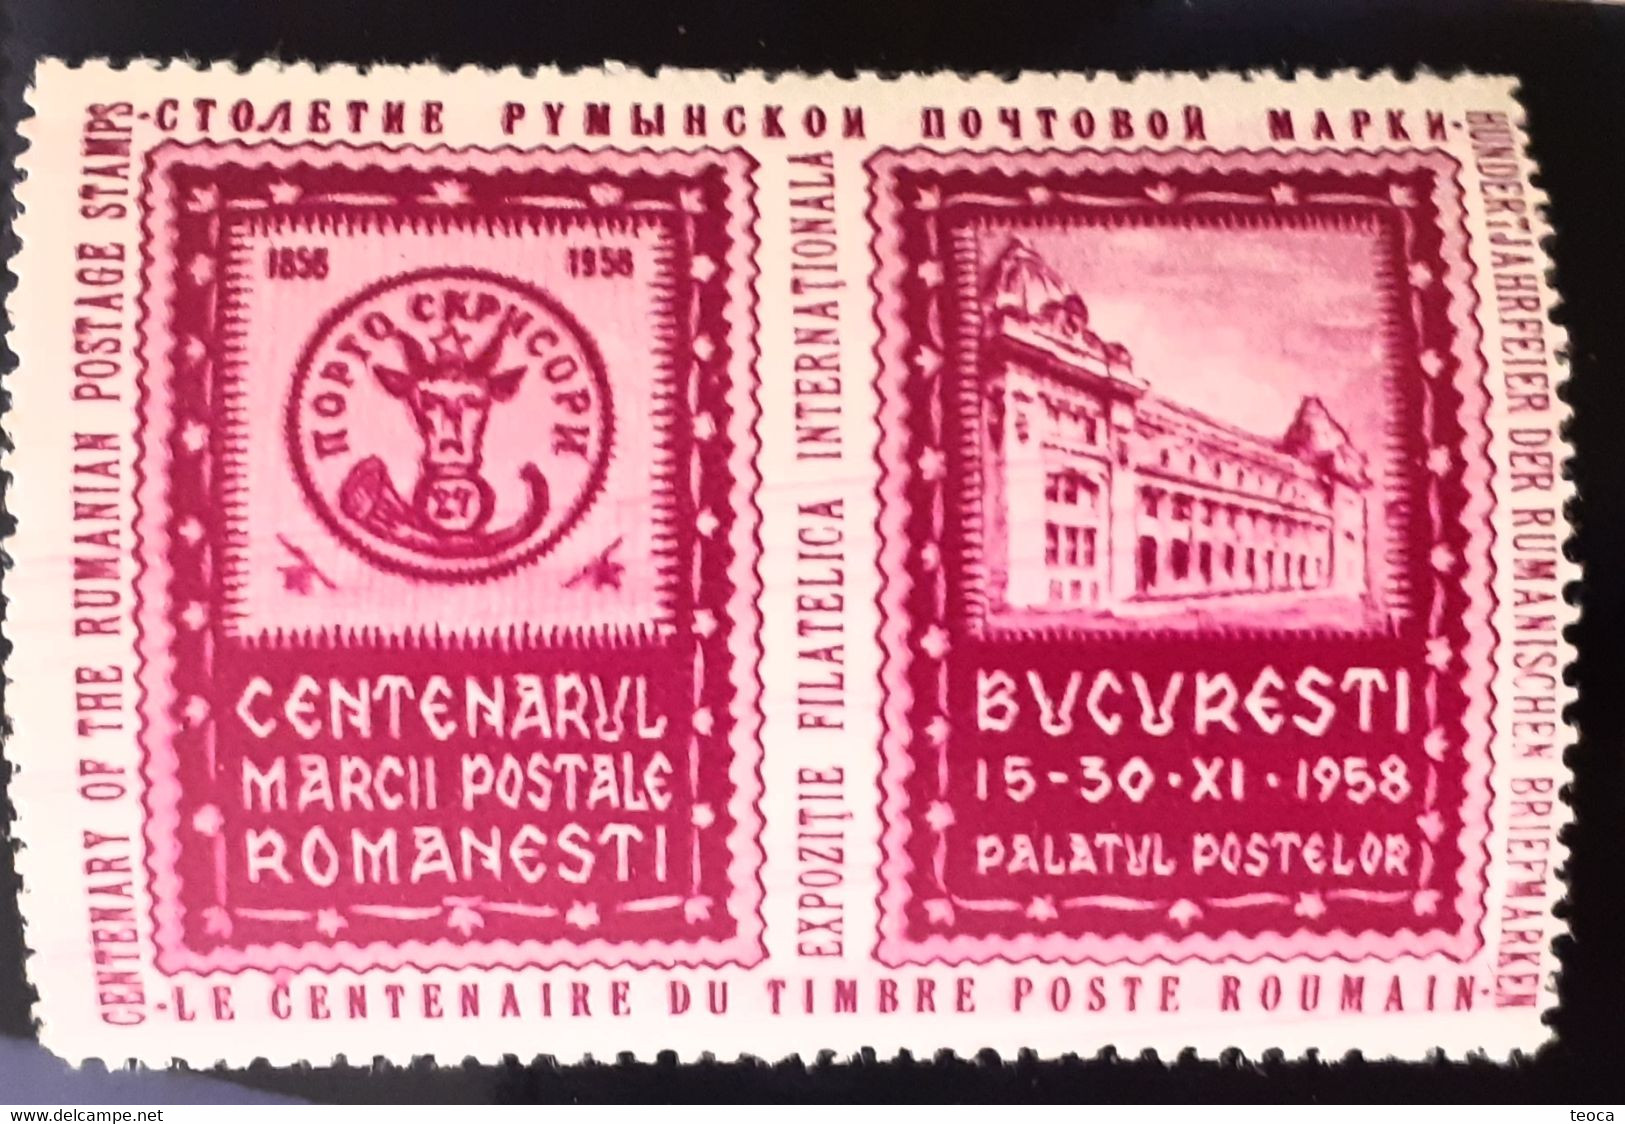 Stamps  Errors Romania 1958 Printed With Lines Vertical, Bull Head, Palace Post, Mnh - Plaatfouten En Curiosa